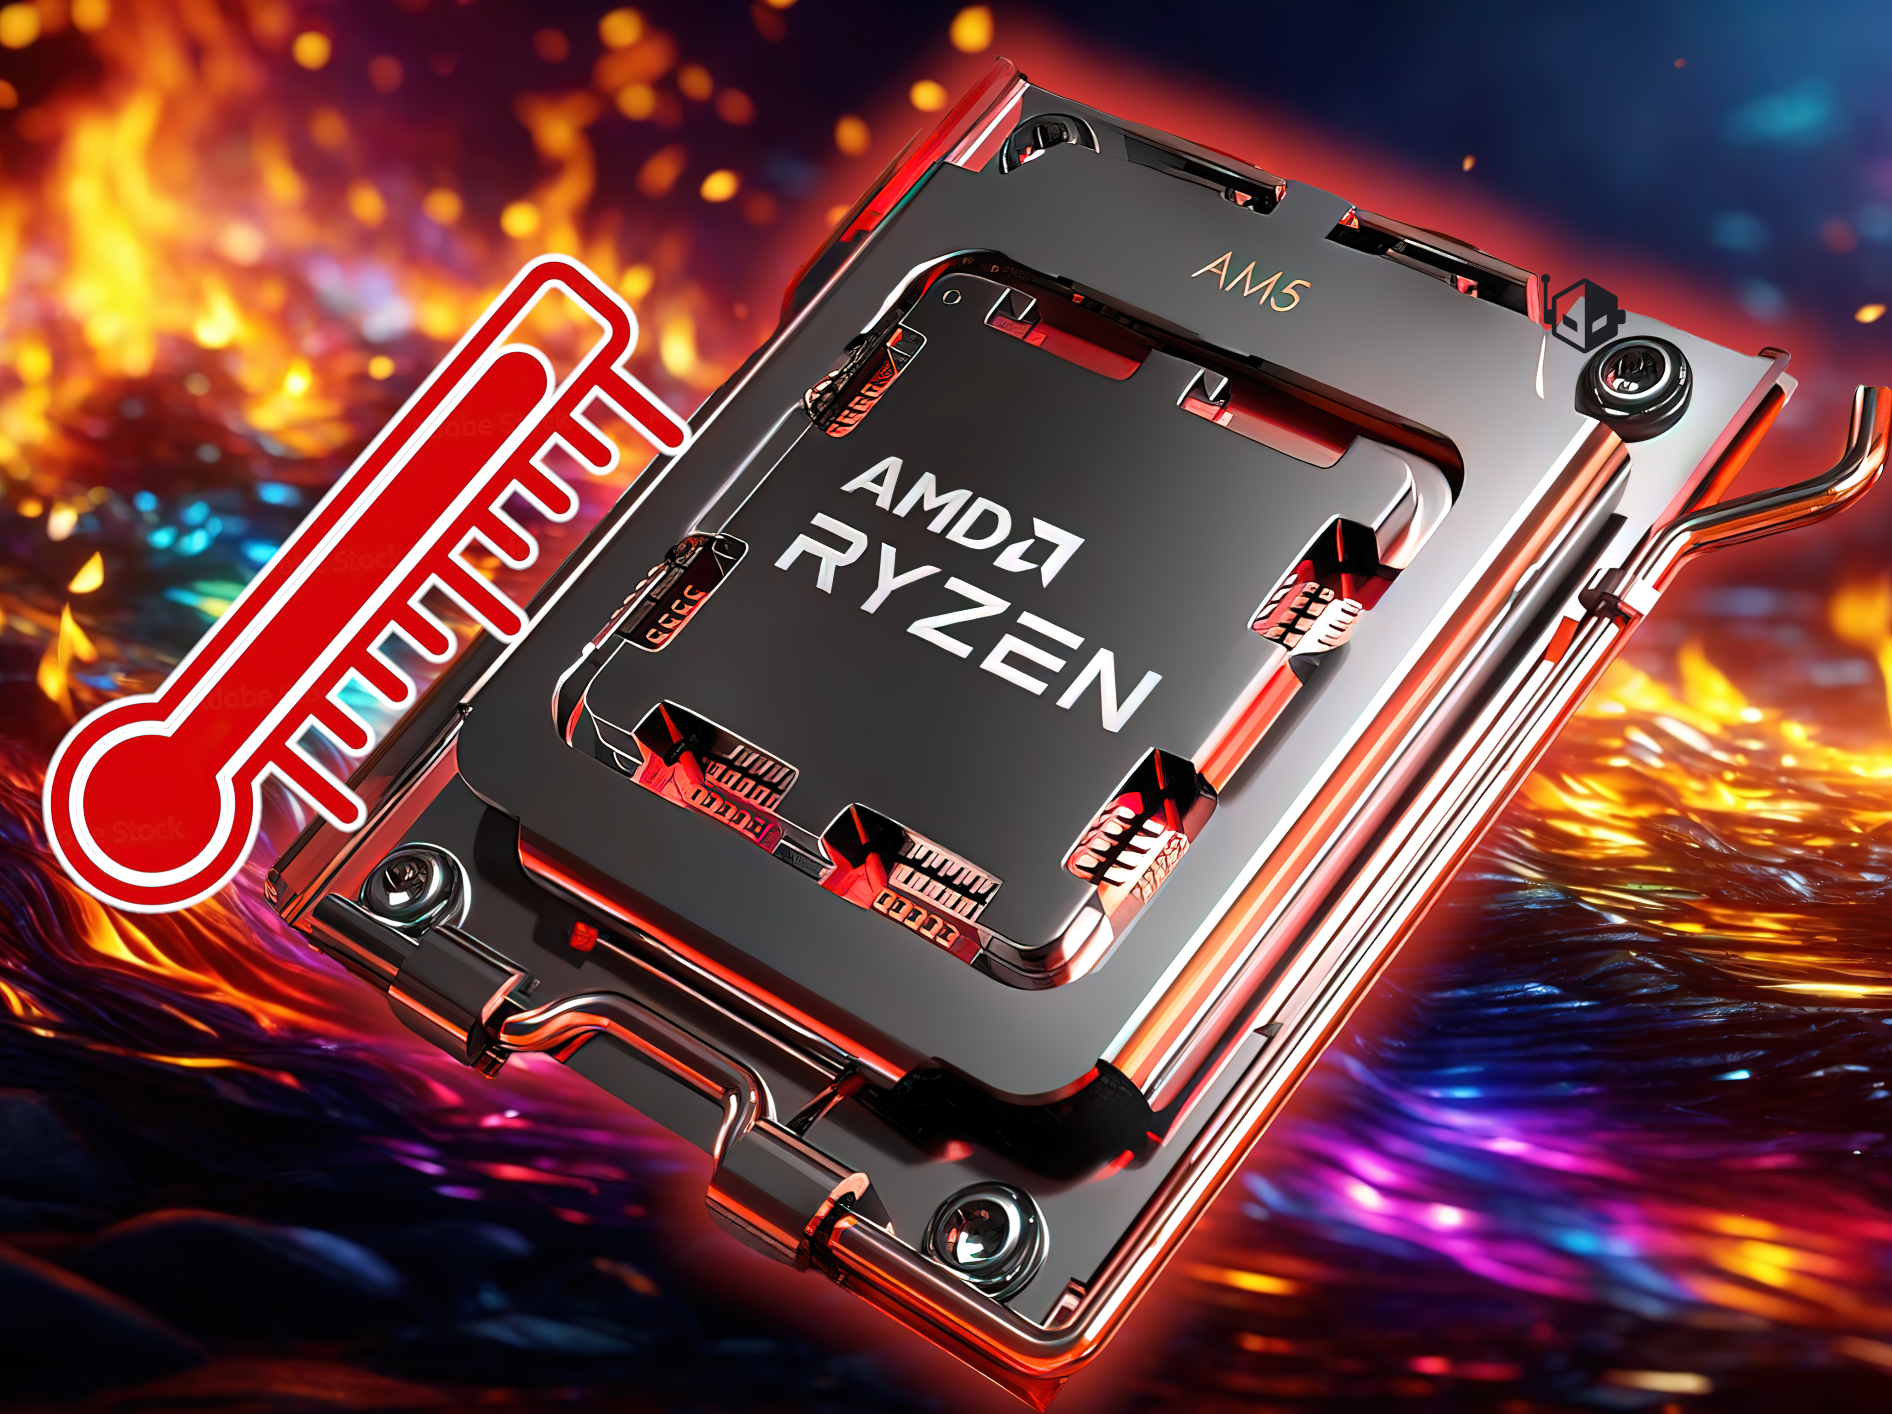 AMD-Ryzen-CP-Hot-Temperatures-High-Density_large.png